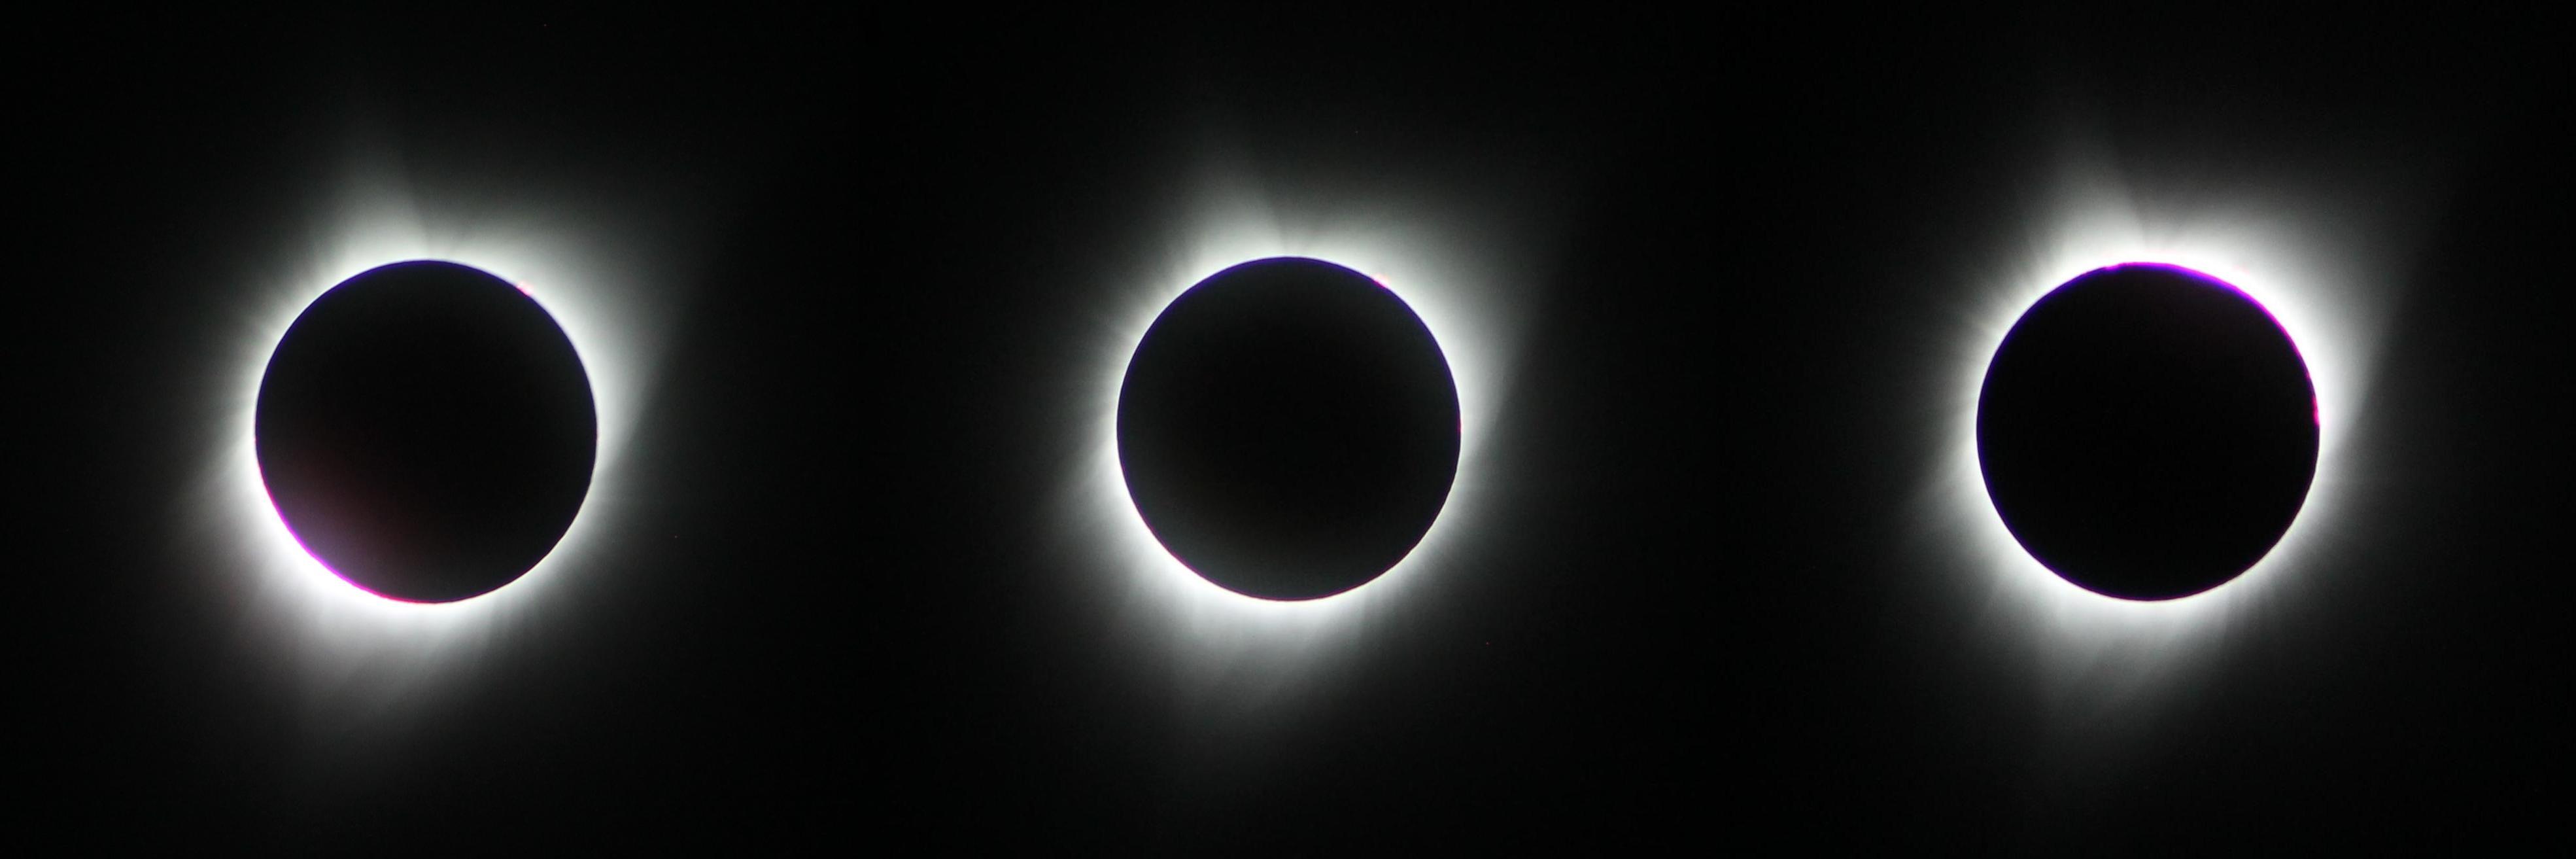 http://capnbob.us/blog/wp-content/uploads/2017/09/totality-sequence-mosaic.jpg